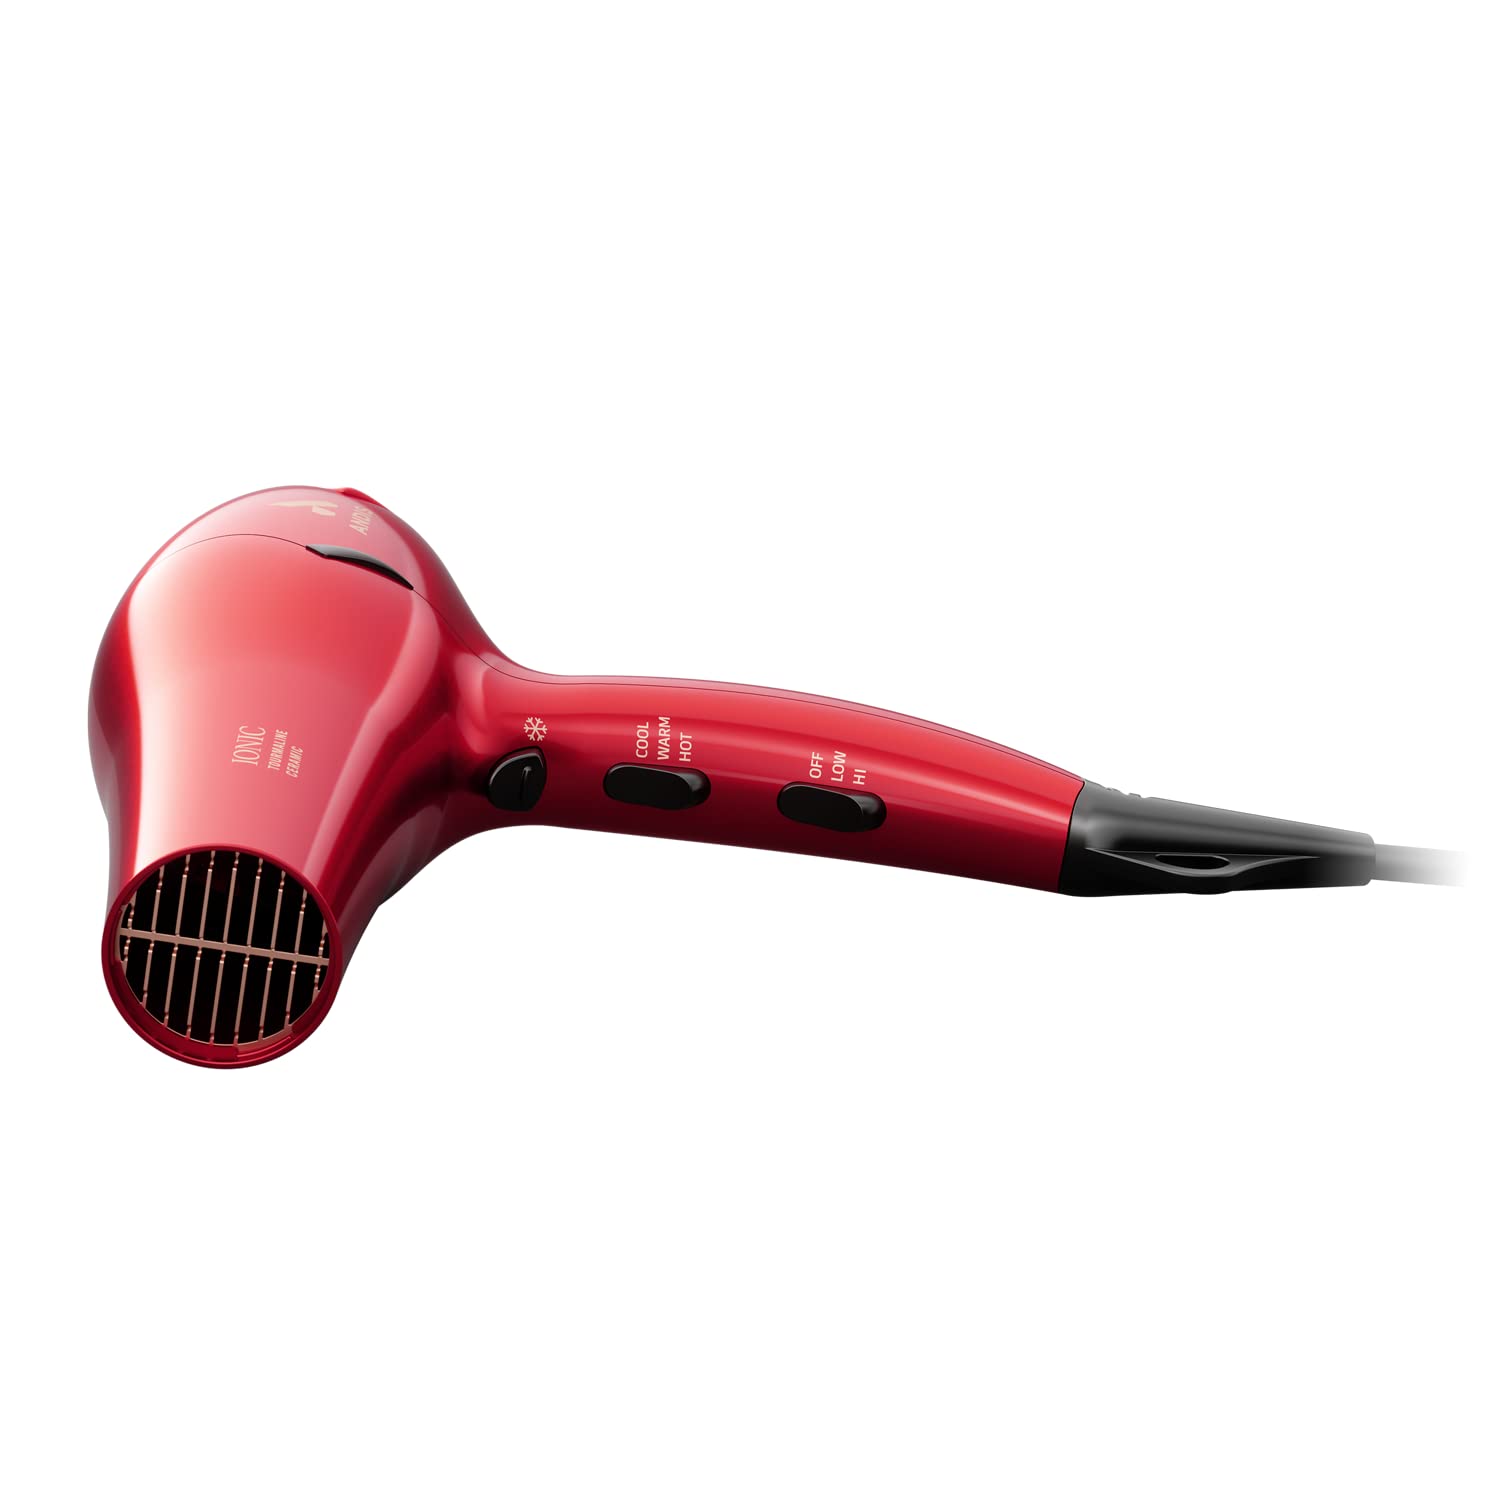 Andis 30290 1875-Watt Tourmaline Ceramic Ionic Pro Dry Professional Hair Dryer, 3 Heat Settings & 2 Speed Settings, 2 Dryer Attachments, Lightweight, Fast Dry & Low Noise, Soft Grip, Red